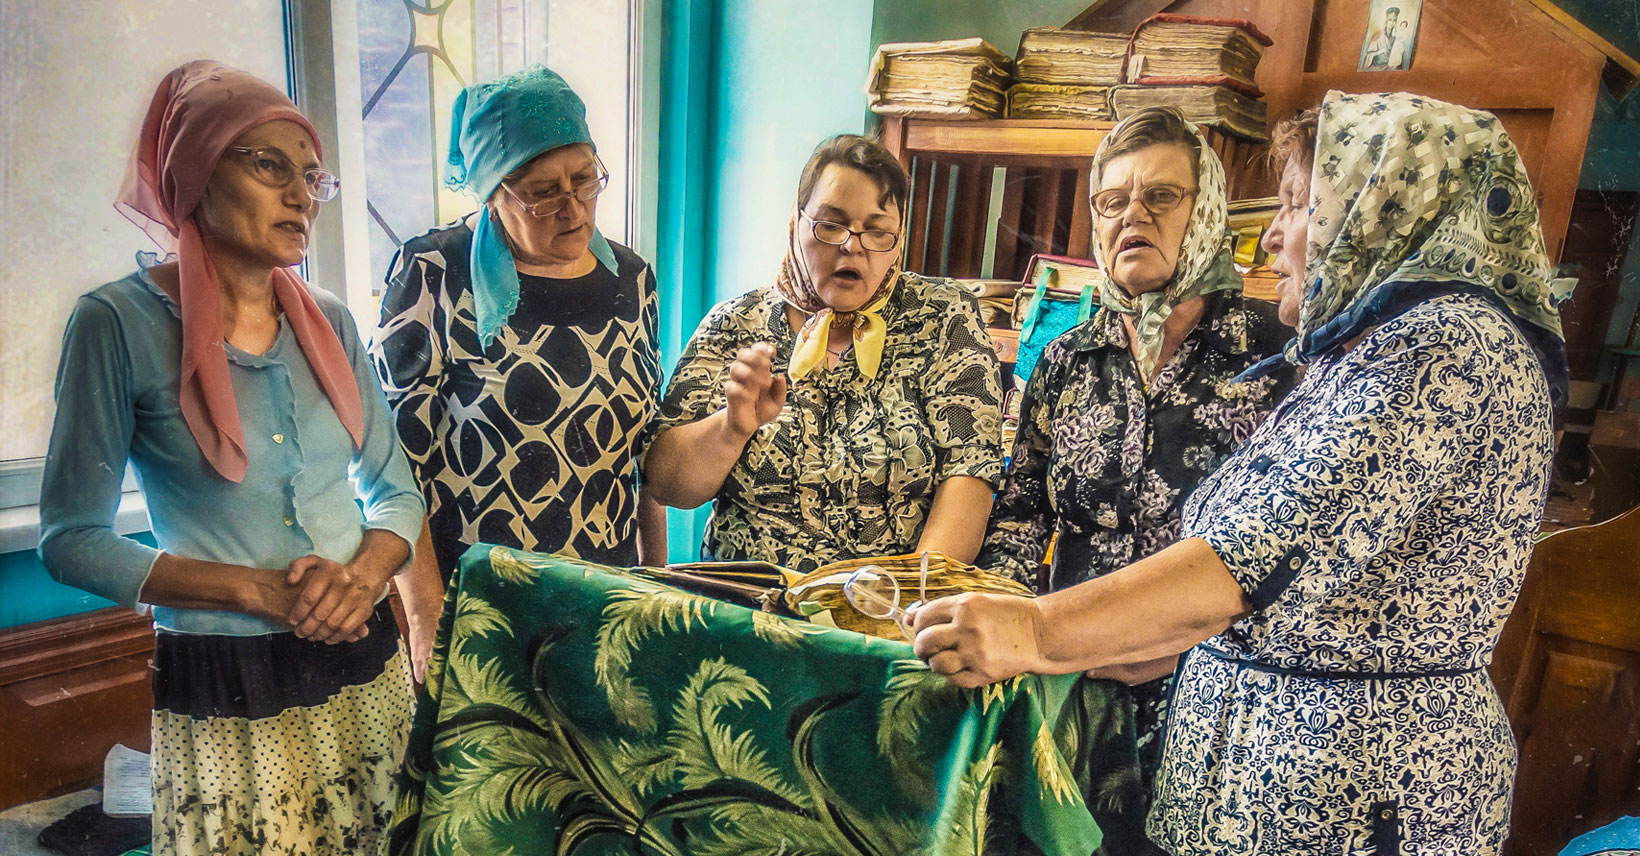 Five Ukrainian grandmothers are standing in semi circle around a lectern with an open book on it. It appears that they are reading or chanting along with the text. They all wear kerchiefs on their heads. Their clothes are colorful and patterned.